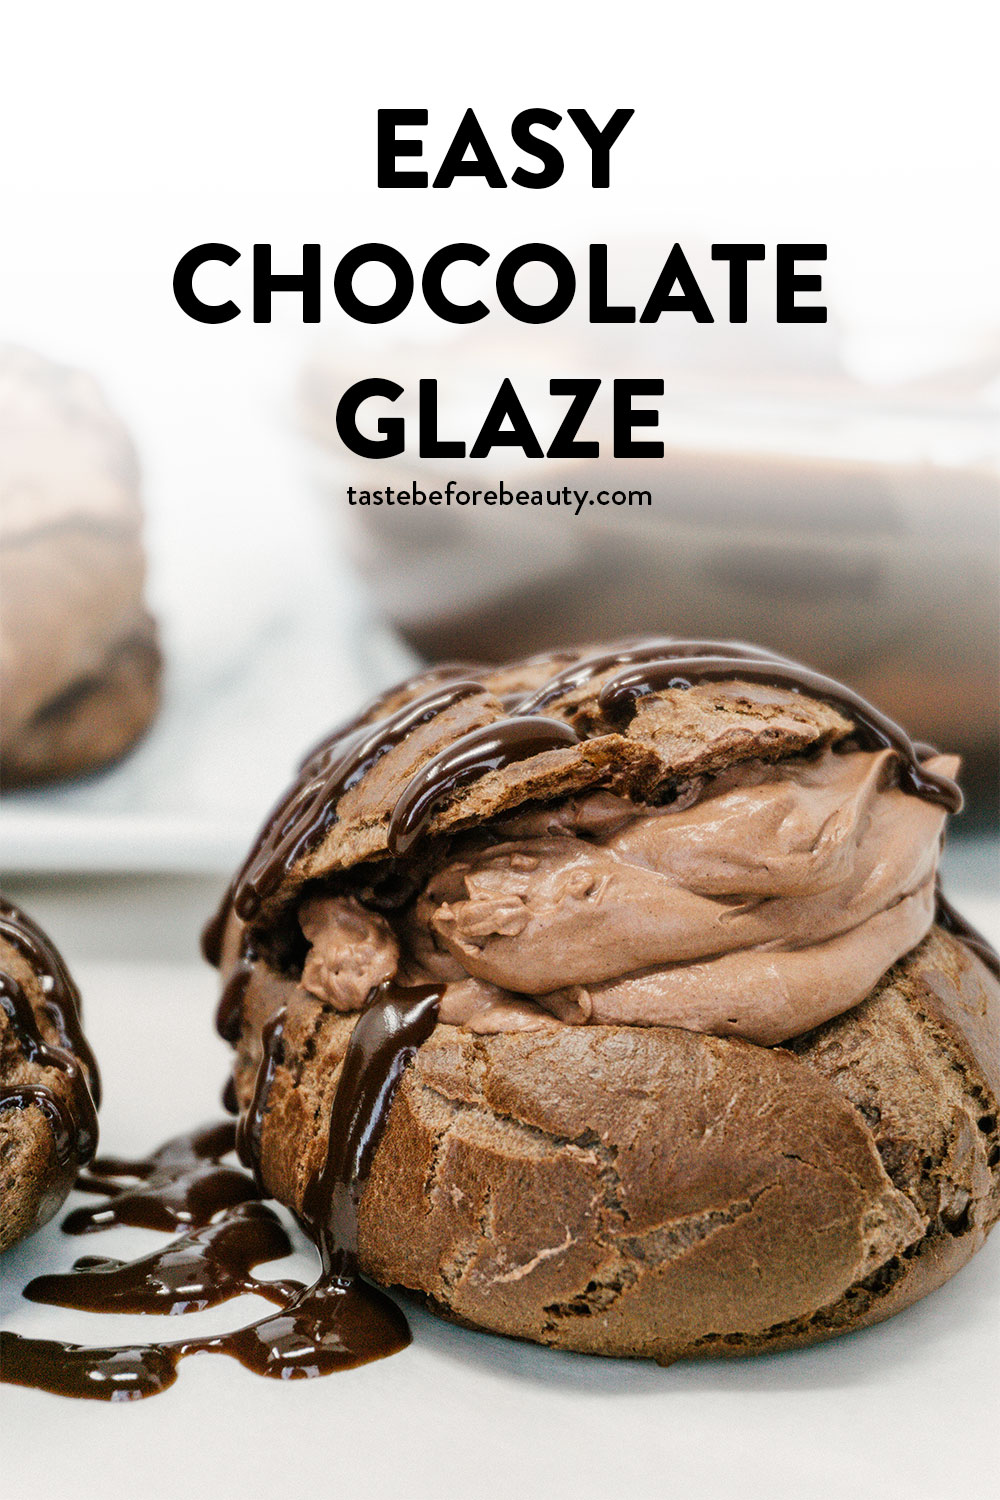 taste before beauty easy chocolate glaze drizzled over a chocolate cream puff with chocolate mousse pinterest pin